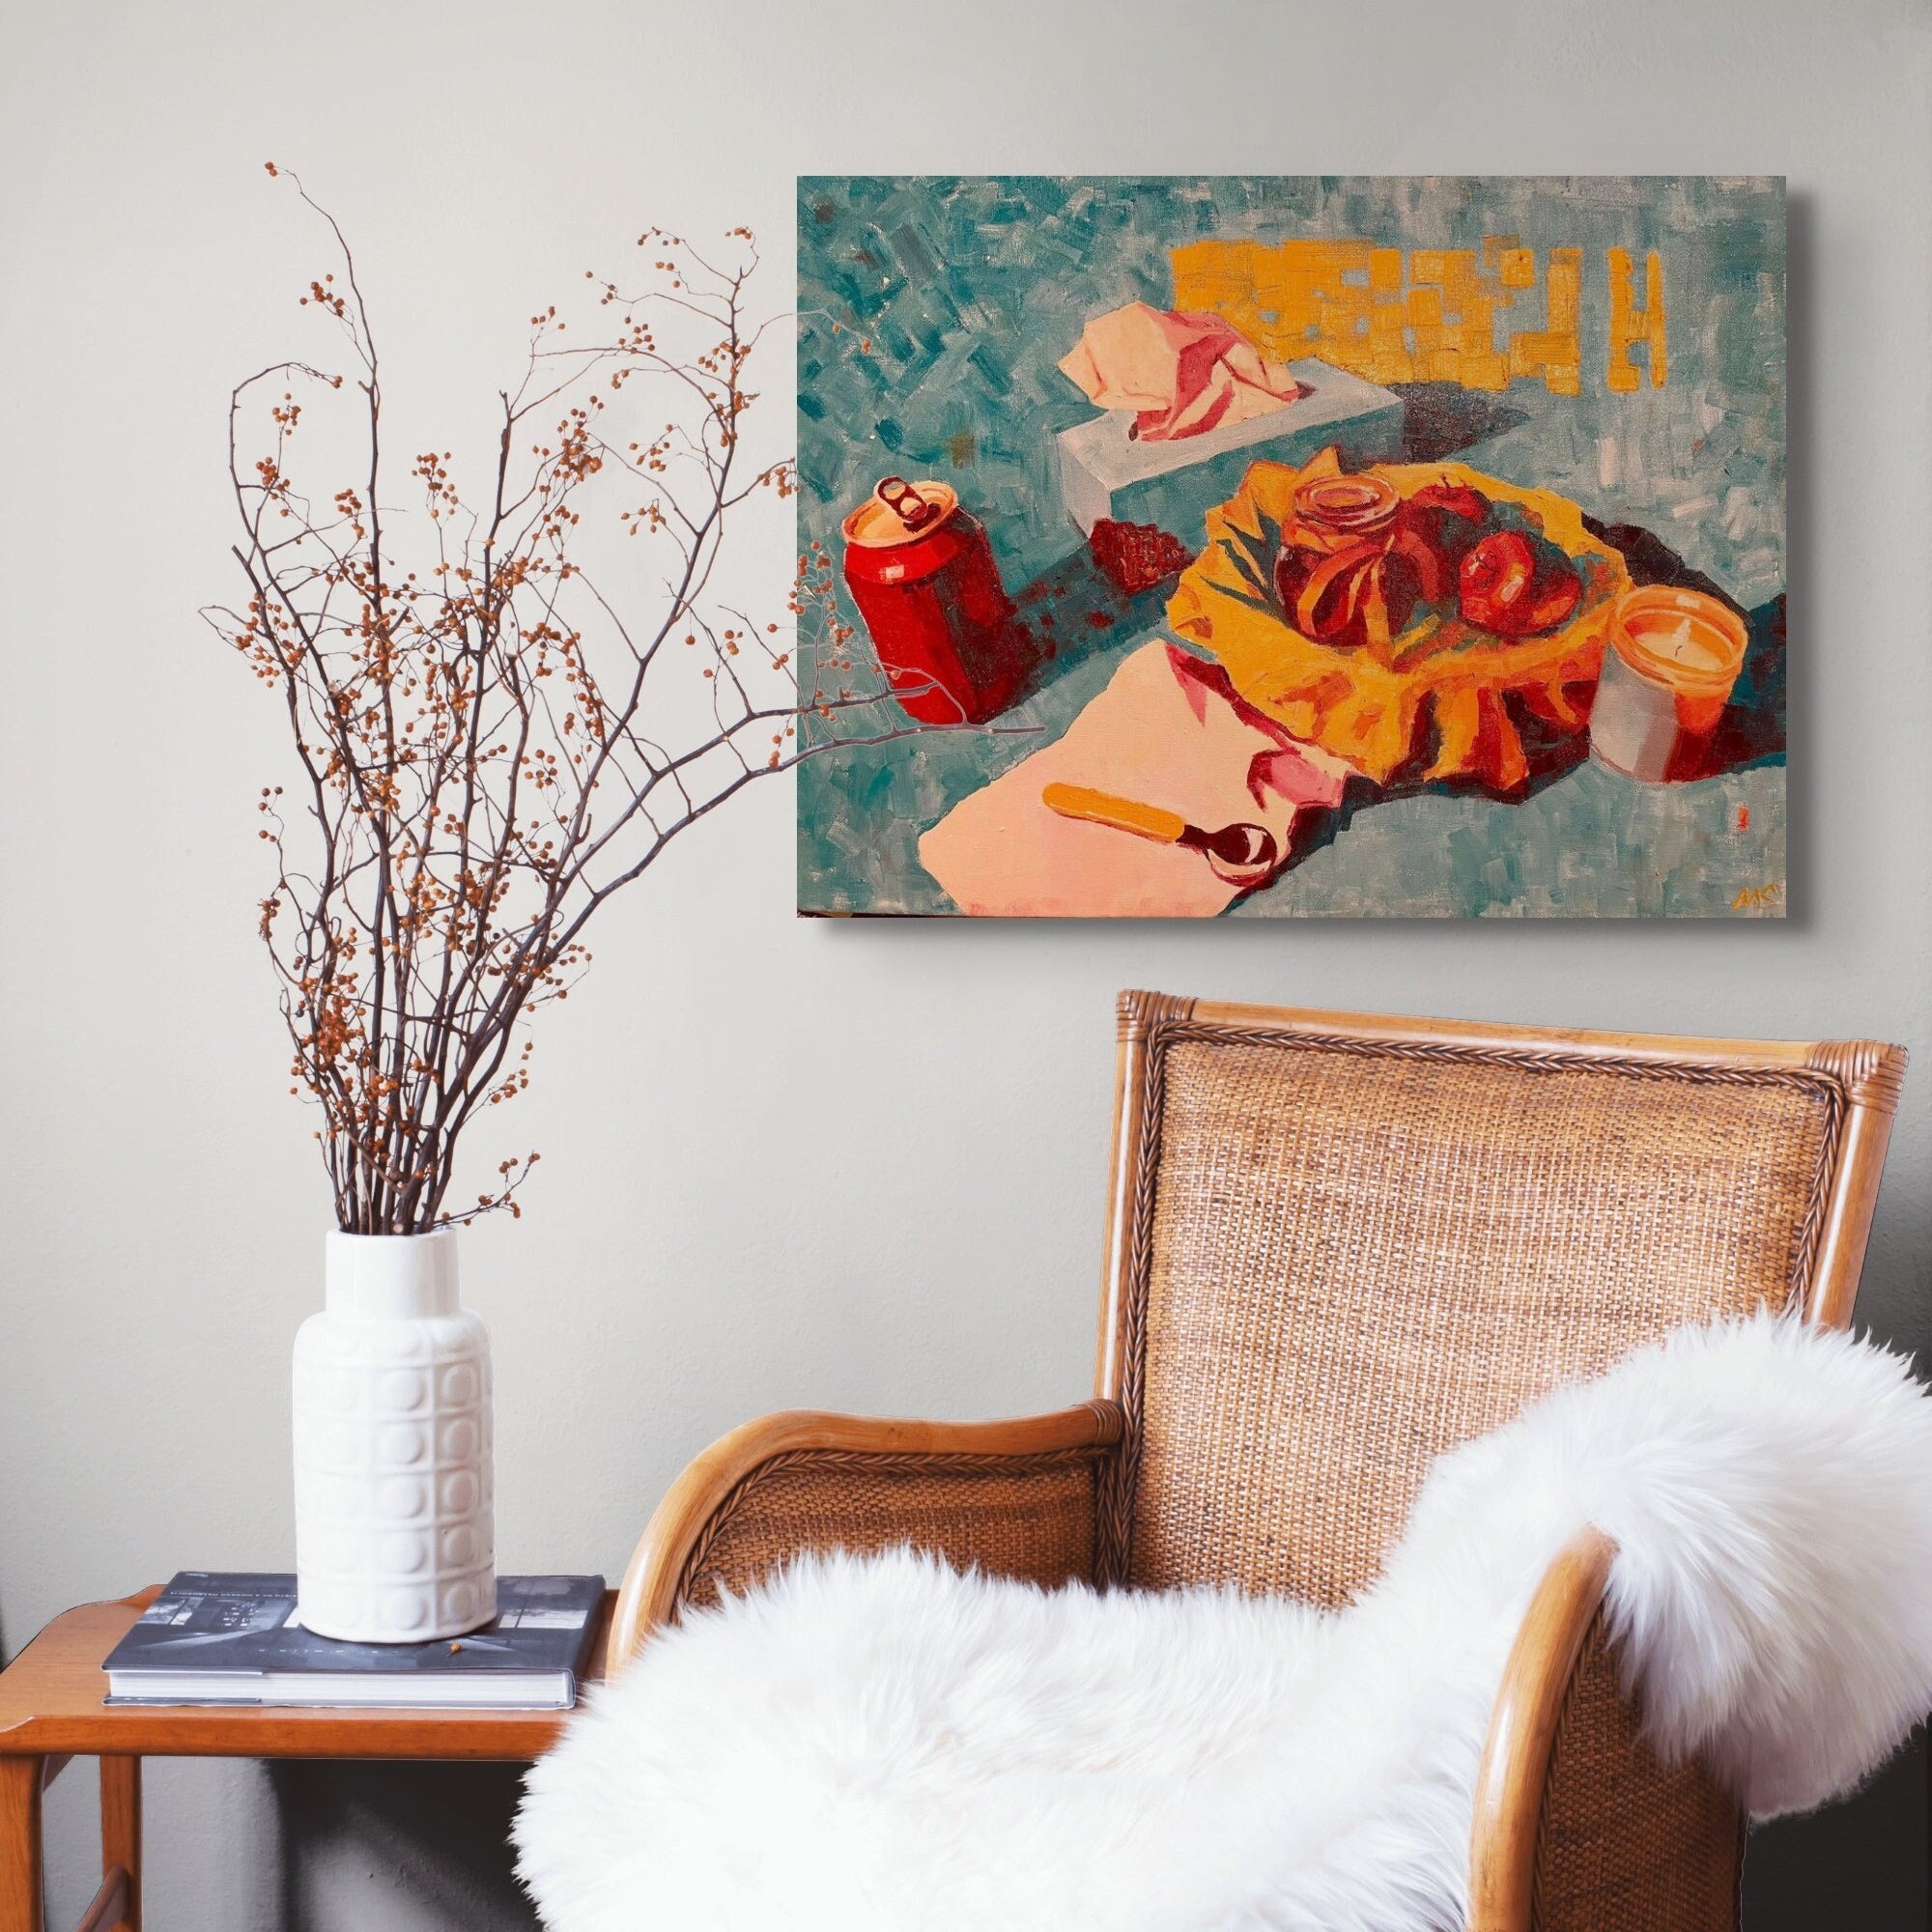 Canvas & Comfort: Artful Oil Paintings for the Heart of Your Home